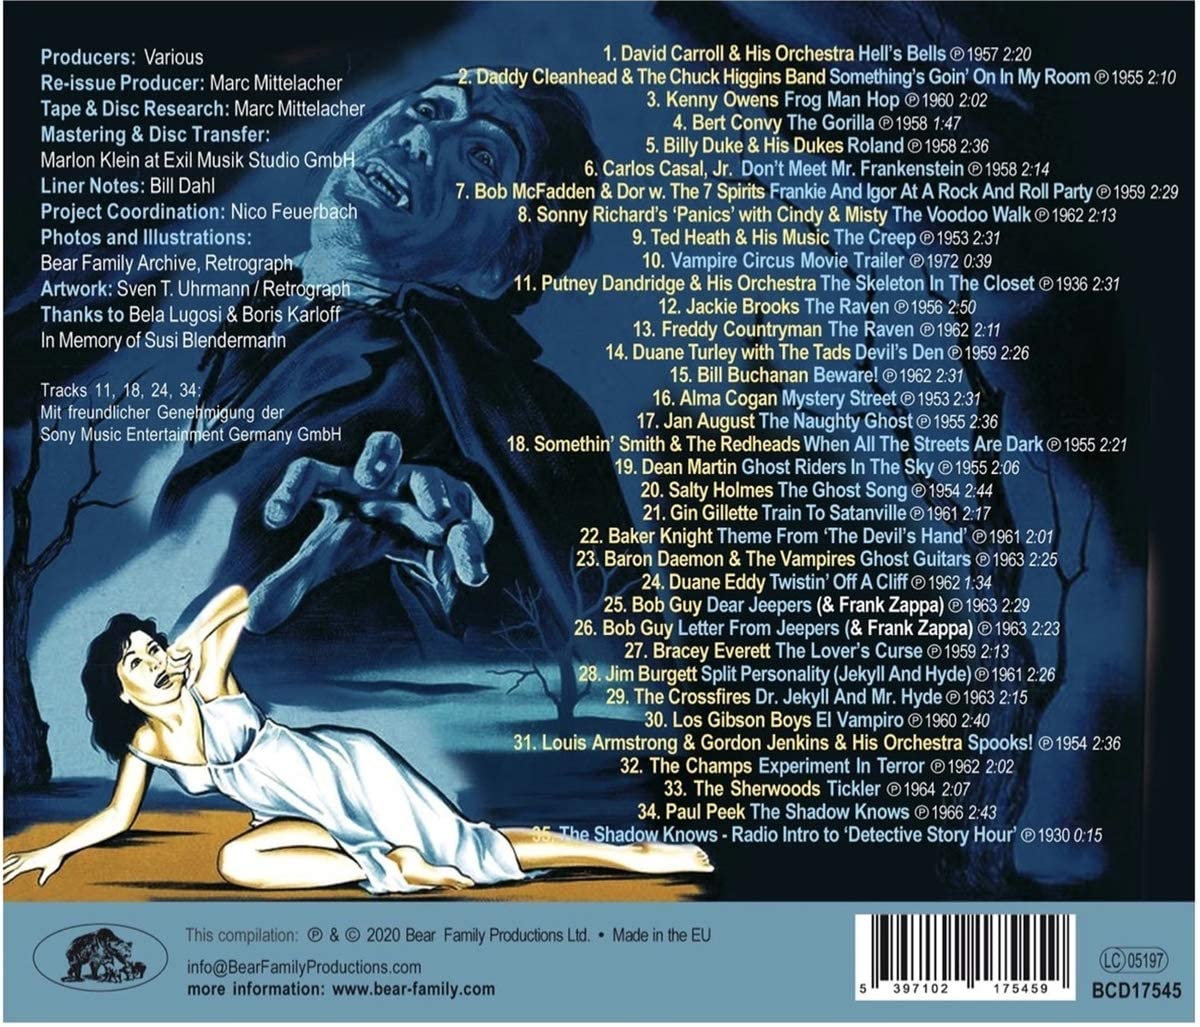 Various Artists/The Shadow Knows More: 35 Scary Tales... [CD]